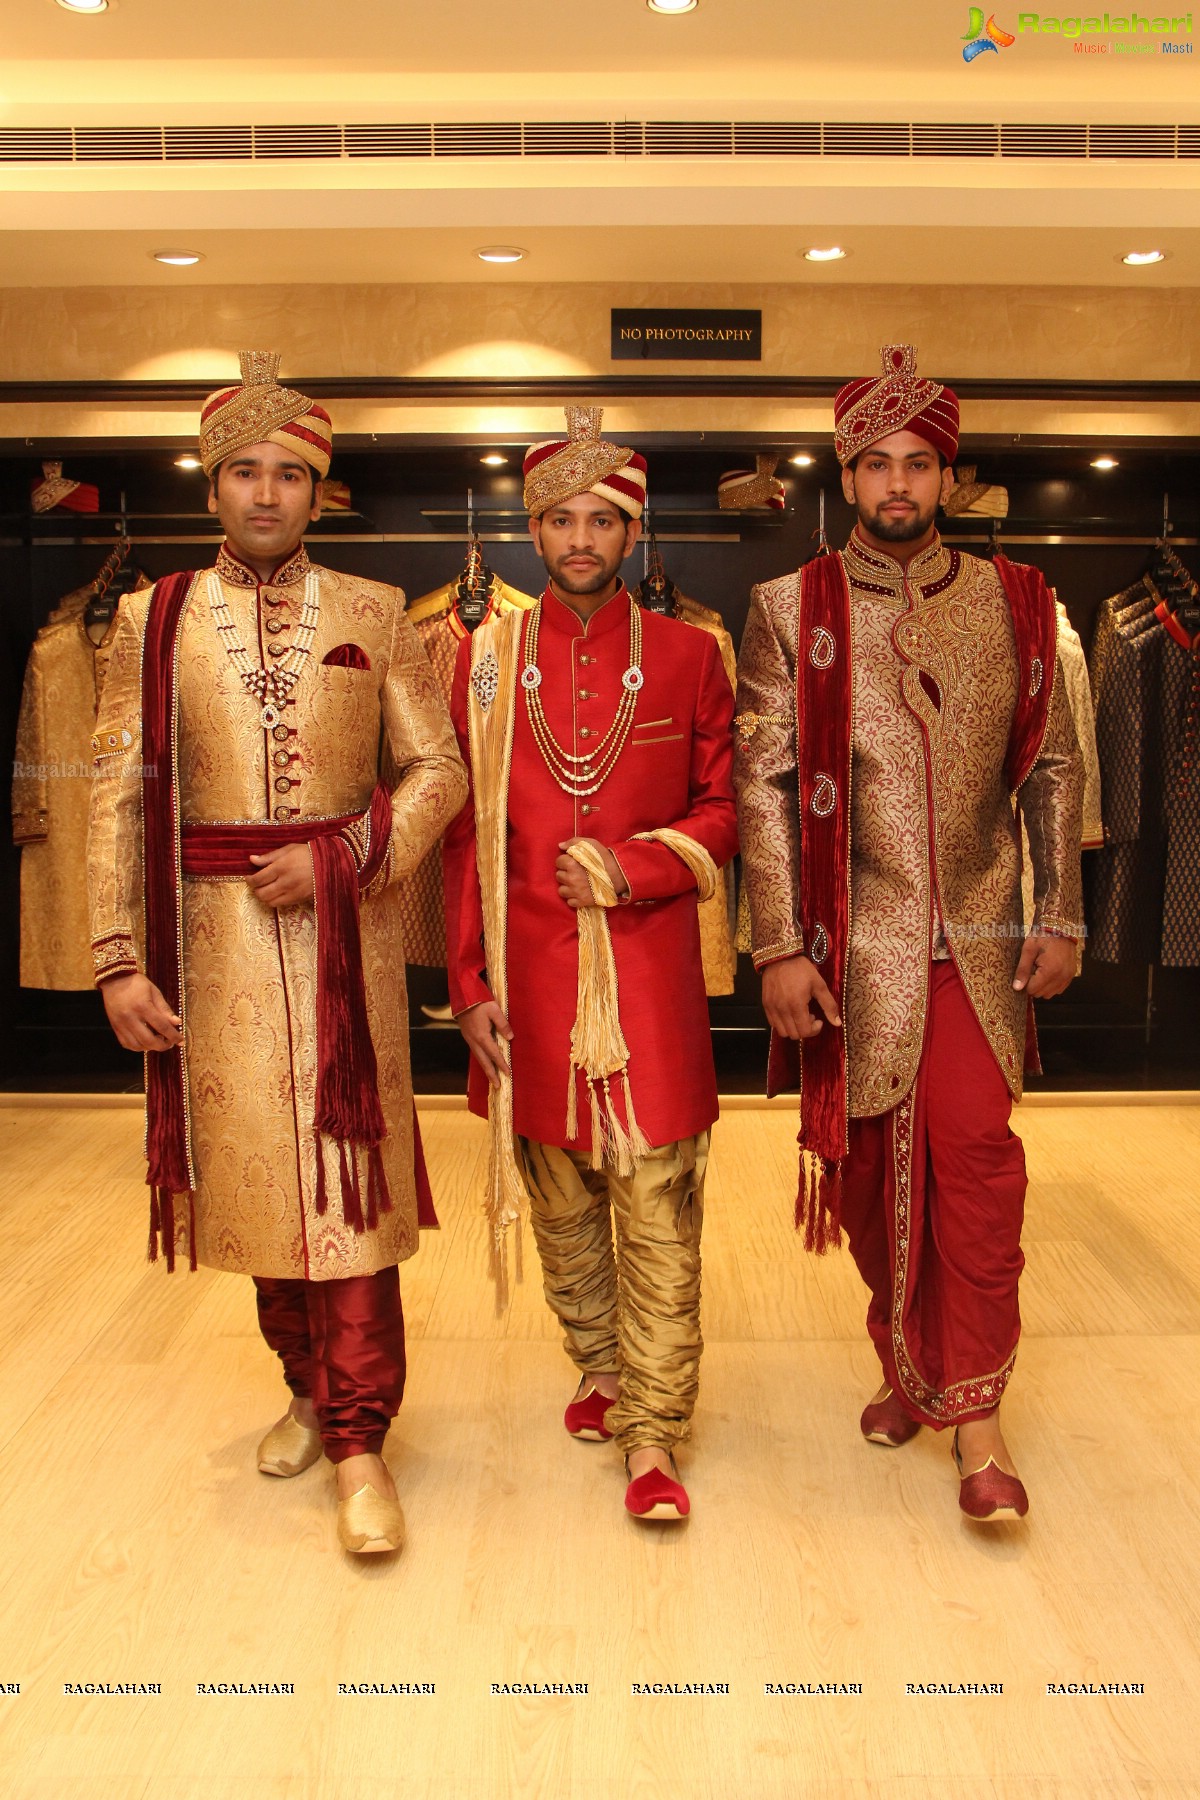 Grand Launch of Exclusive Ramzan Collection at New Meena Bazar